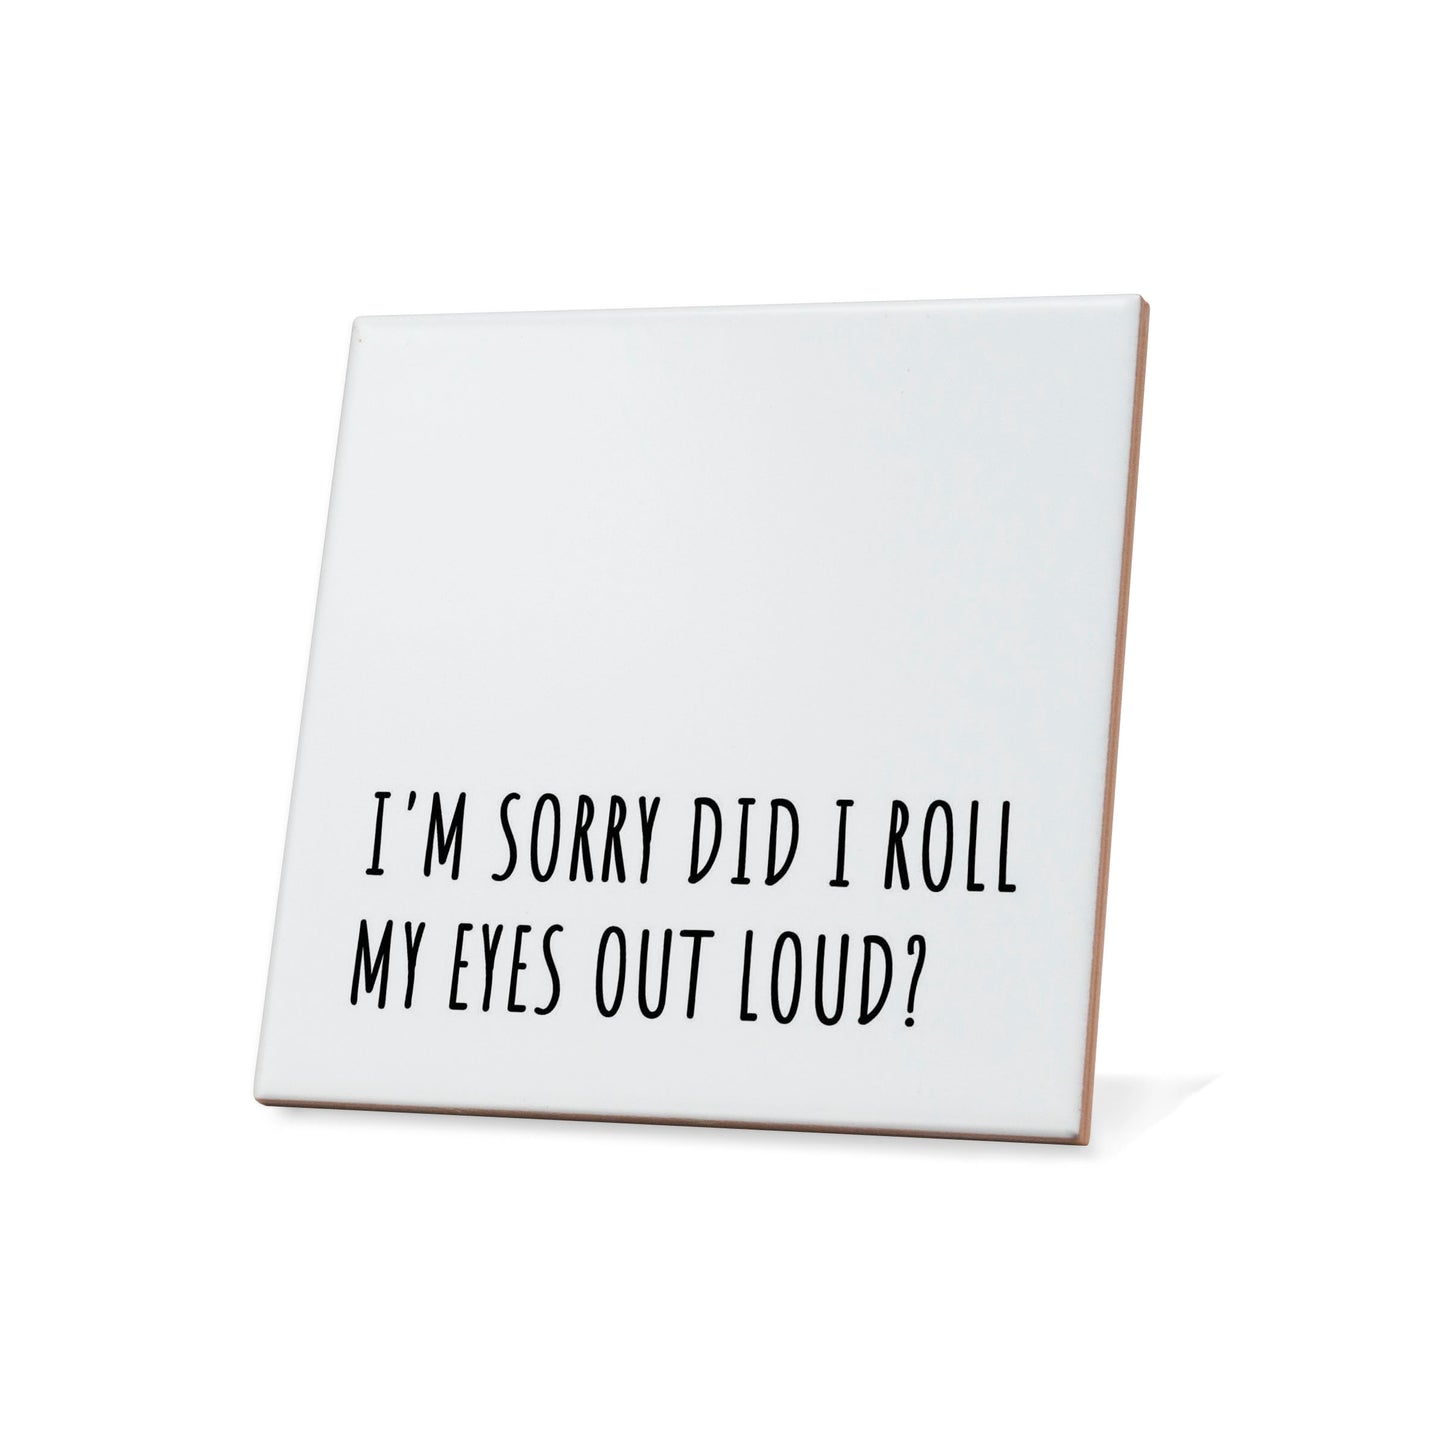 I'm sorry did I roll my eyes out loud? Quote Coaster